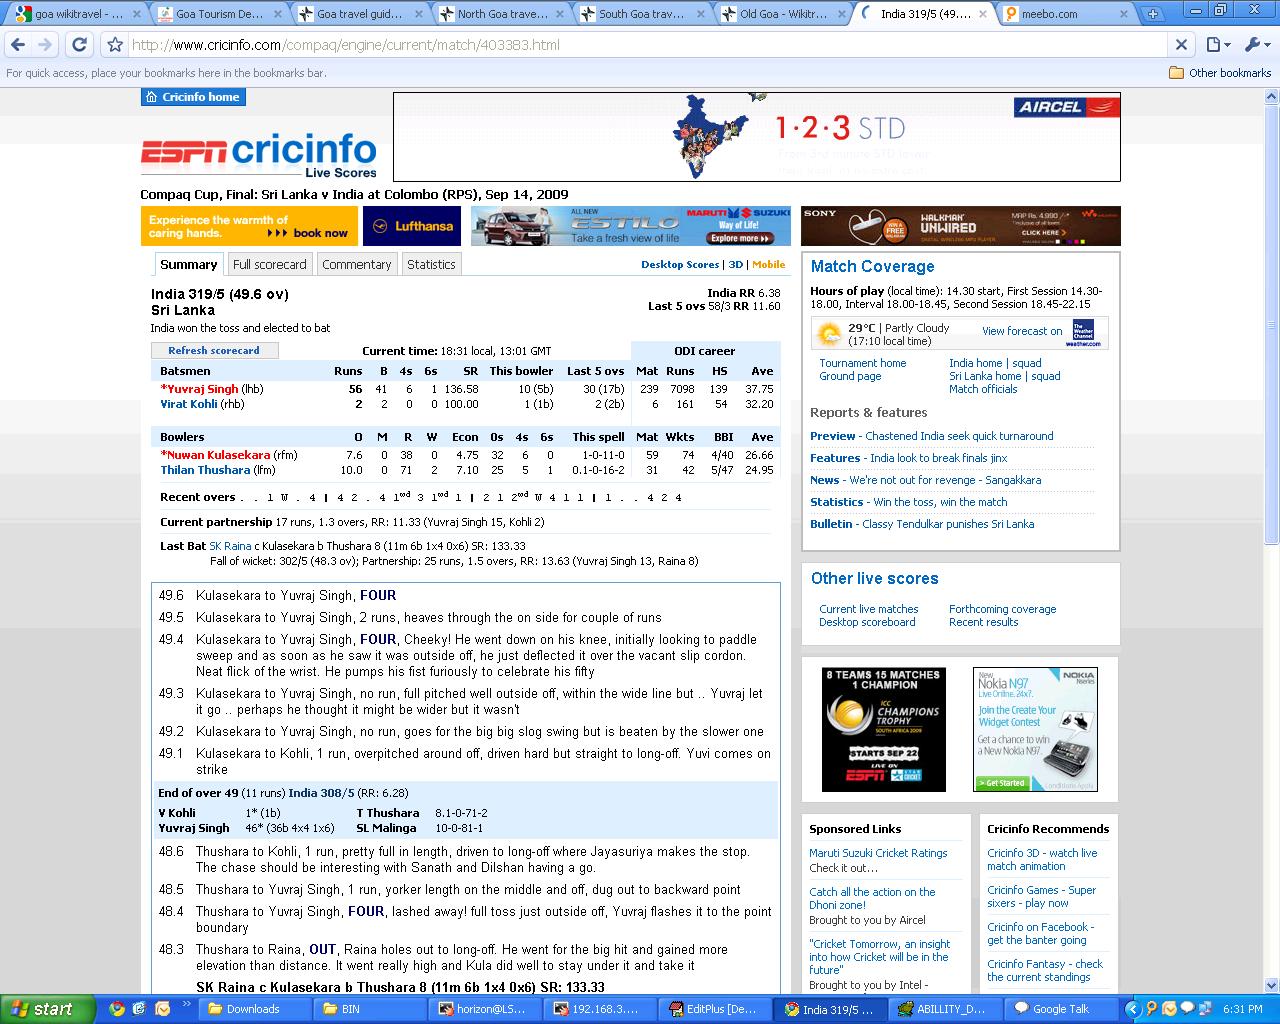 This time CRICINFO has done it. Guy how many time do I have to tell ...